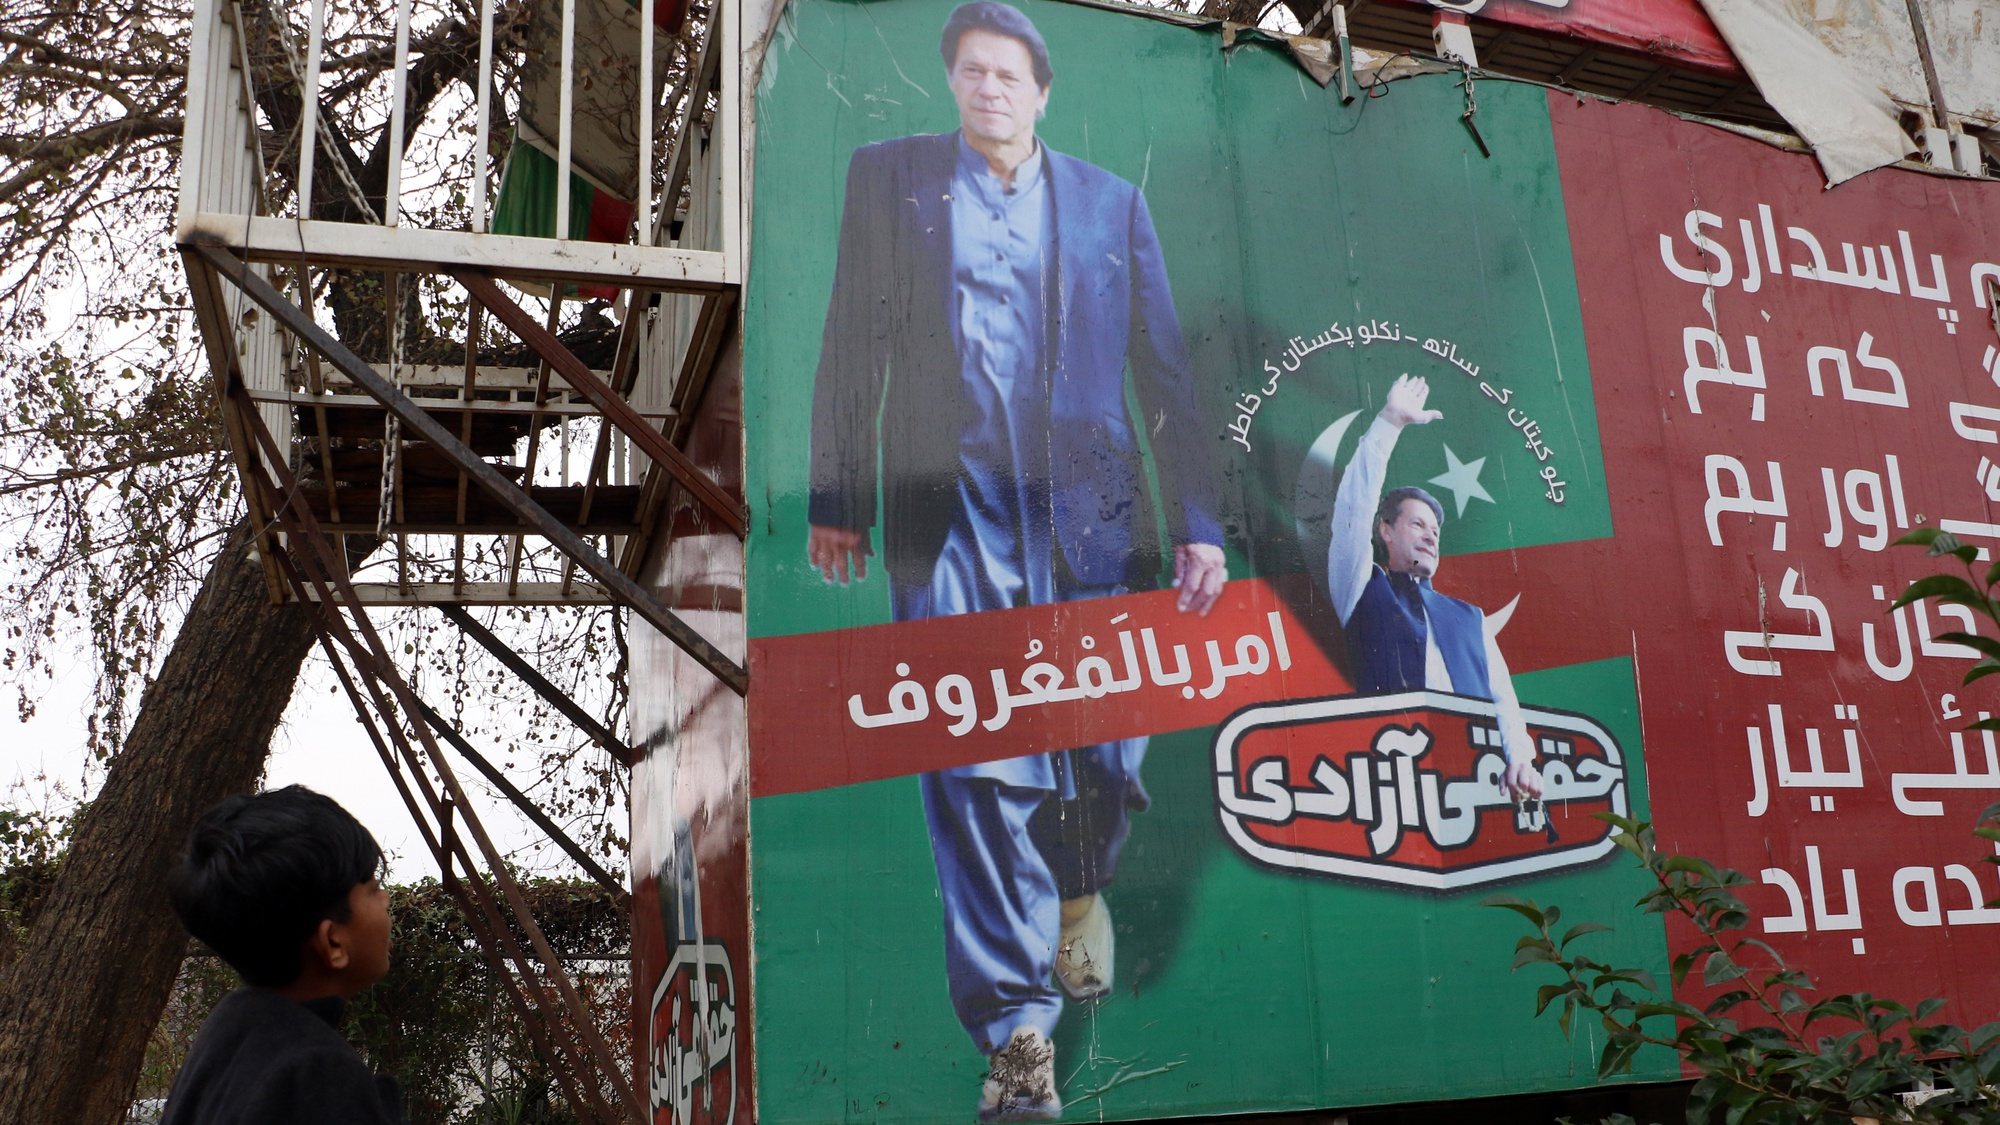 epa11113727 Electoral posters of jailed former Prime Minister Imran Khan are displayed on a container after a court verdict imprisoning Khan to 10 years, in Islamabad, Pakistan, 30 January 2024. Former Pakistani Prime Minister Imran Khan and his top aide Shah Mahmood Qureshi have been sentenced to 10 years in jail for leaking official secrets, just days before the general elections scheduled for 08 February. The sentencing took place following a trial conducted within the prison where Khan has been detained, despite previous rulings declaring the jail trial as illegal. Khan and Qureshi are accused of leaking diplomatic correspondence between Washington and Islamabad during Khan&#039;s tenure as prime minister. The Pakistan Tehreek-e-Insaf (PTI) party has vowed to challenge the decision in a higher court. The case has raised serious questions about the transparency of the trial and has been marred by allegations of pre-vote rigging, with Khan&#039;s party facing suppression.  EPA/SOHAIL SHAHZAD